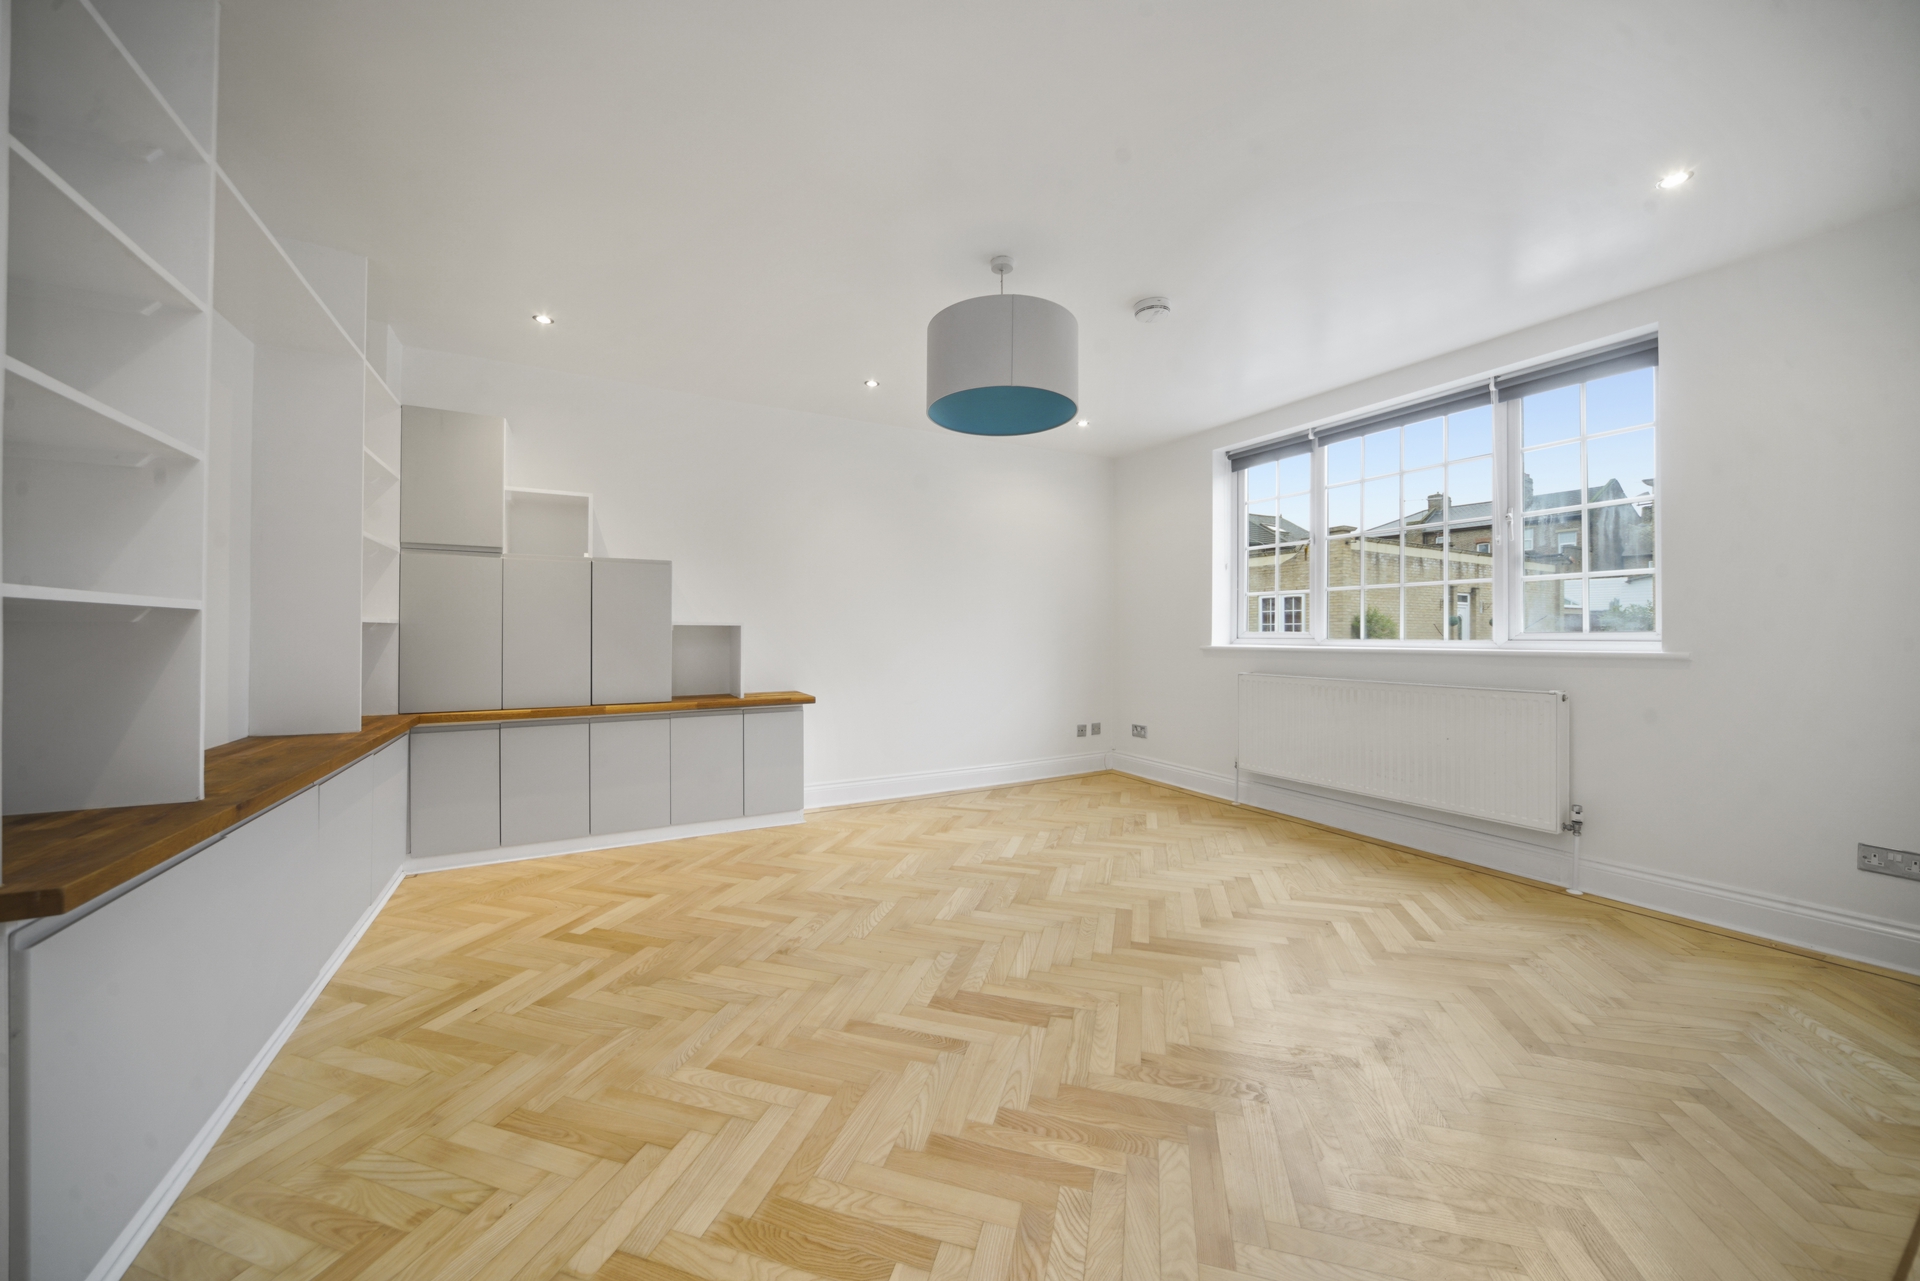 4 Bedroom House to rent in , Hanwell, W7